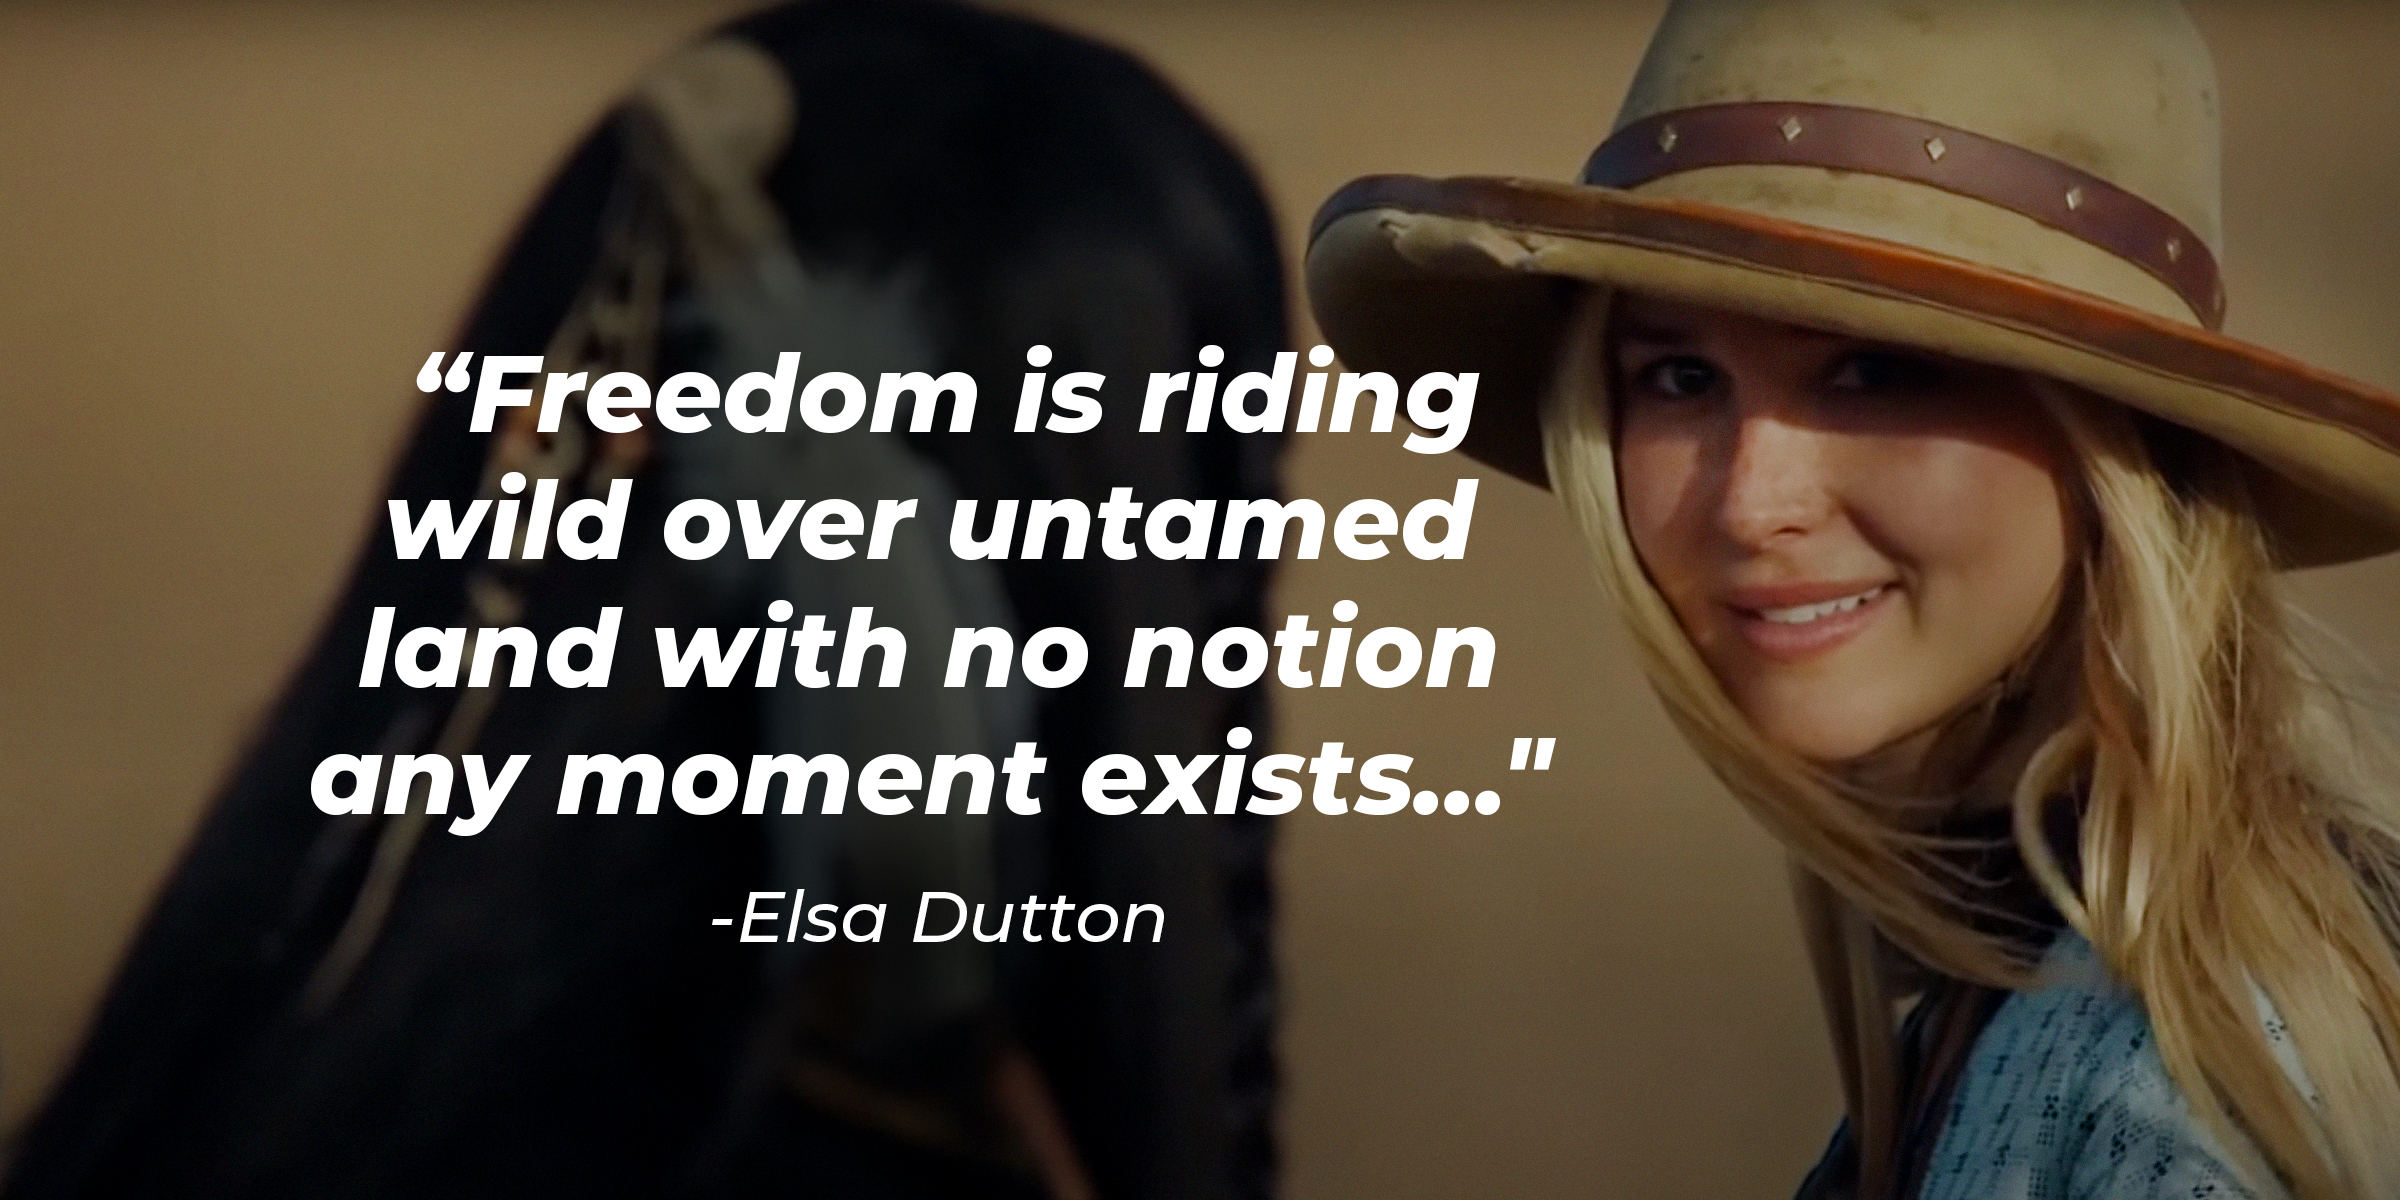 A picture of Elsa Dutton with her quote: “Freedom is riding wild over untamed land with no notion any moment exists…" | Source: youtube.com/ParamountNetwork